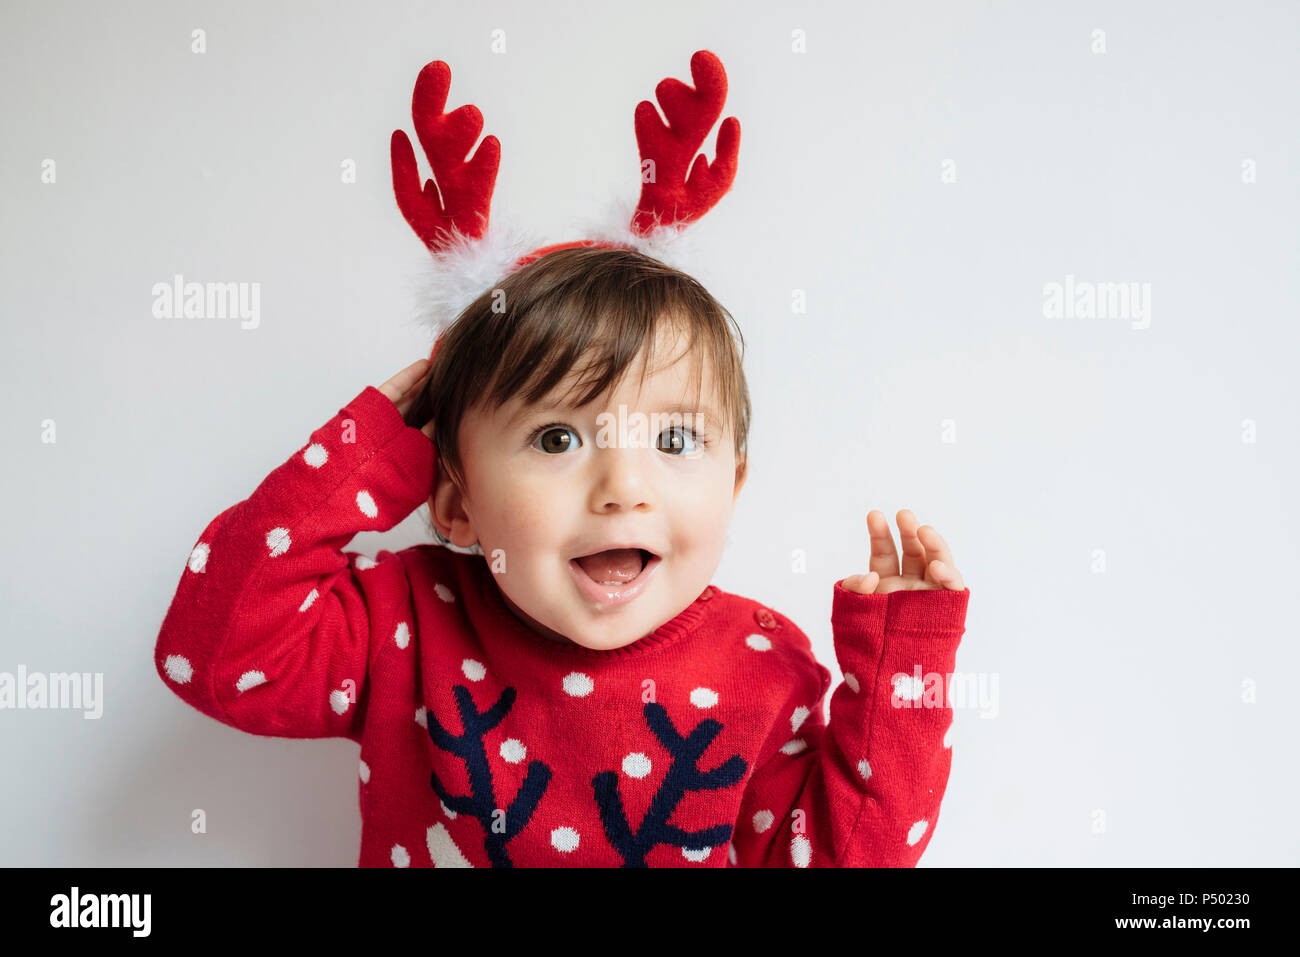 Portrait of baby girl with reindeer antlers headband at Christmas time Stock Photo